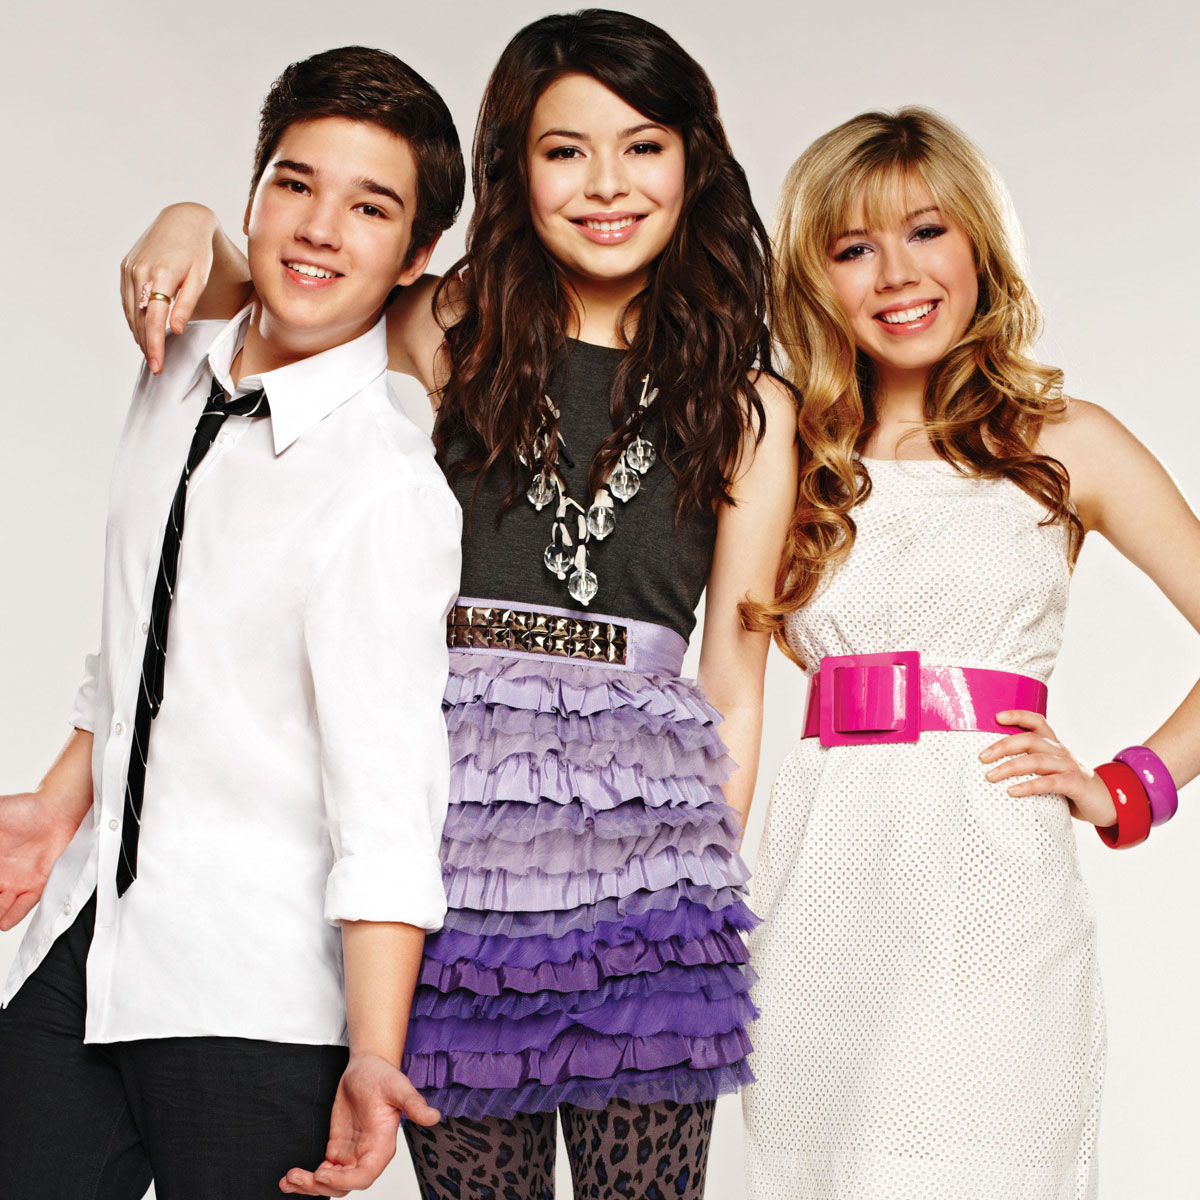 nathan kress now and then